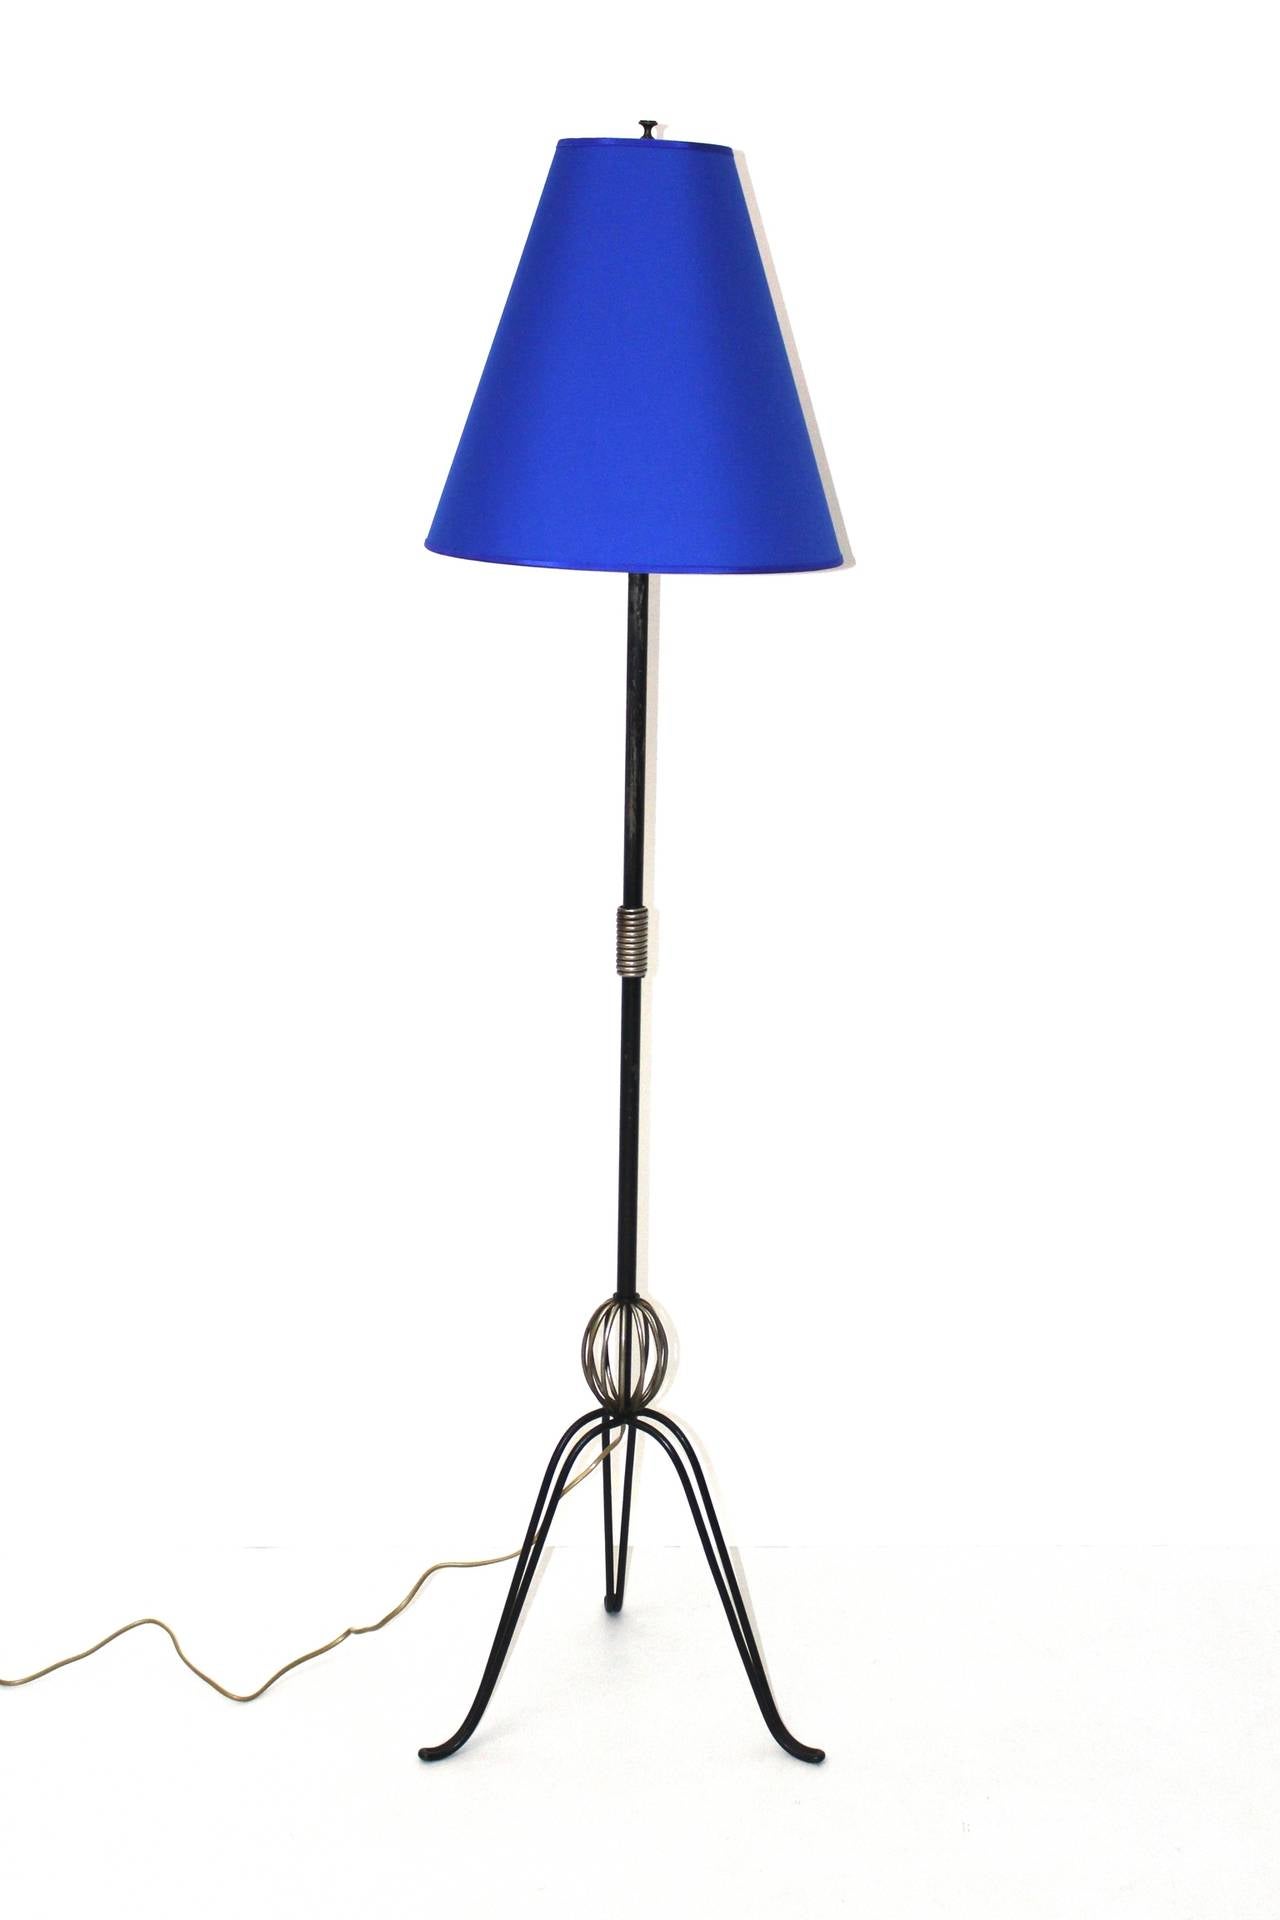 Mid century modern floor lamp, which was made out of black lacquered metal and designed and manufactured France 1950s.
A tripod curved lamp base gives the floor lamp a certain elegance.
The renewed lamp shade in blue textile fabric provides a dose